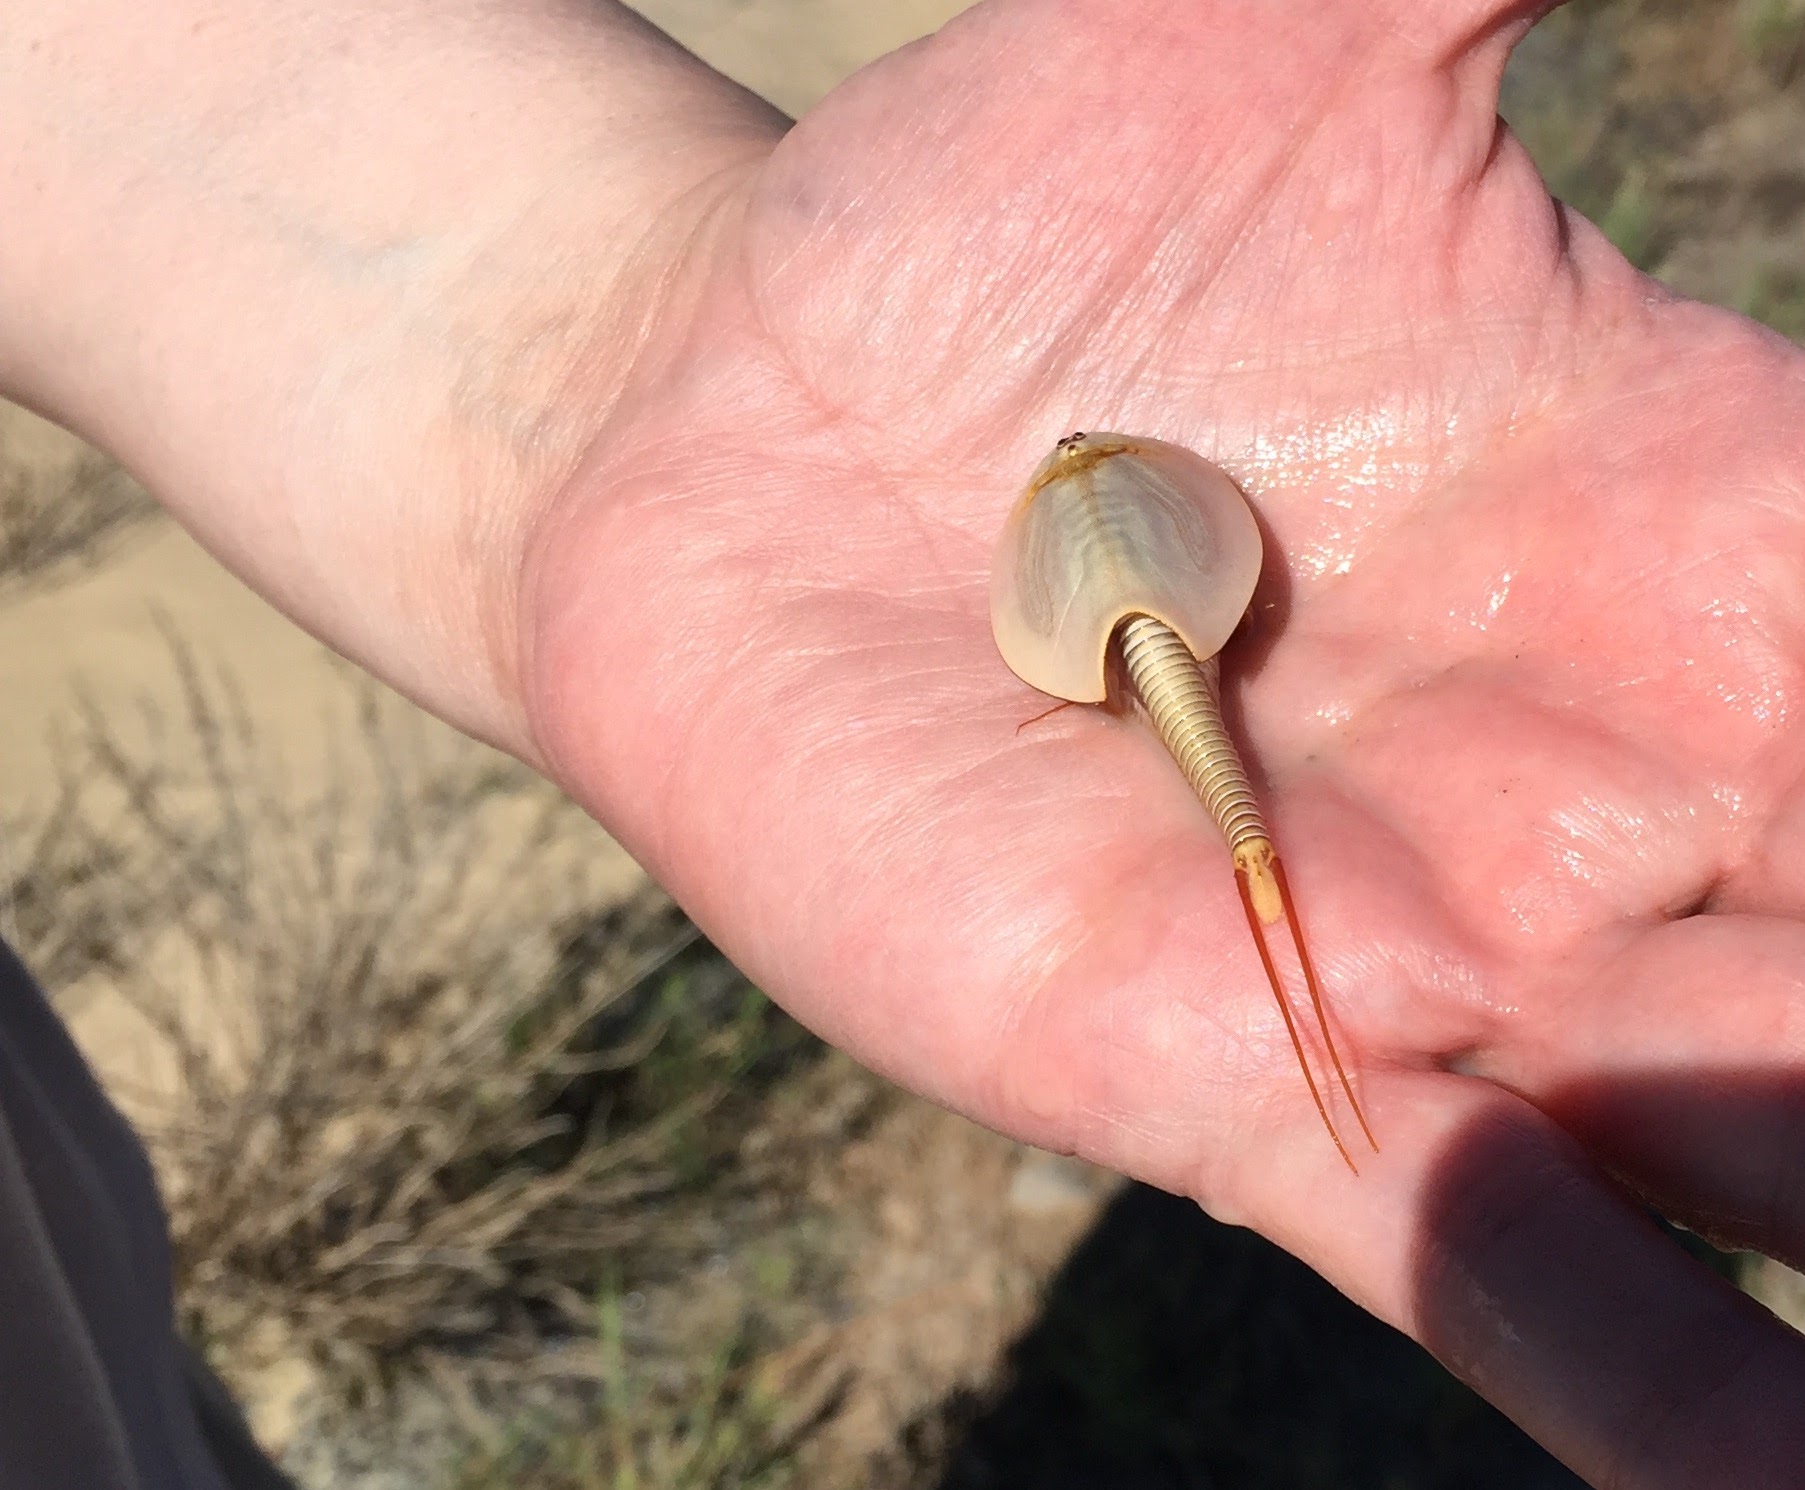 a small creature like a horseshoe crab but not actually one